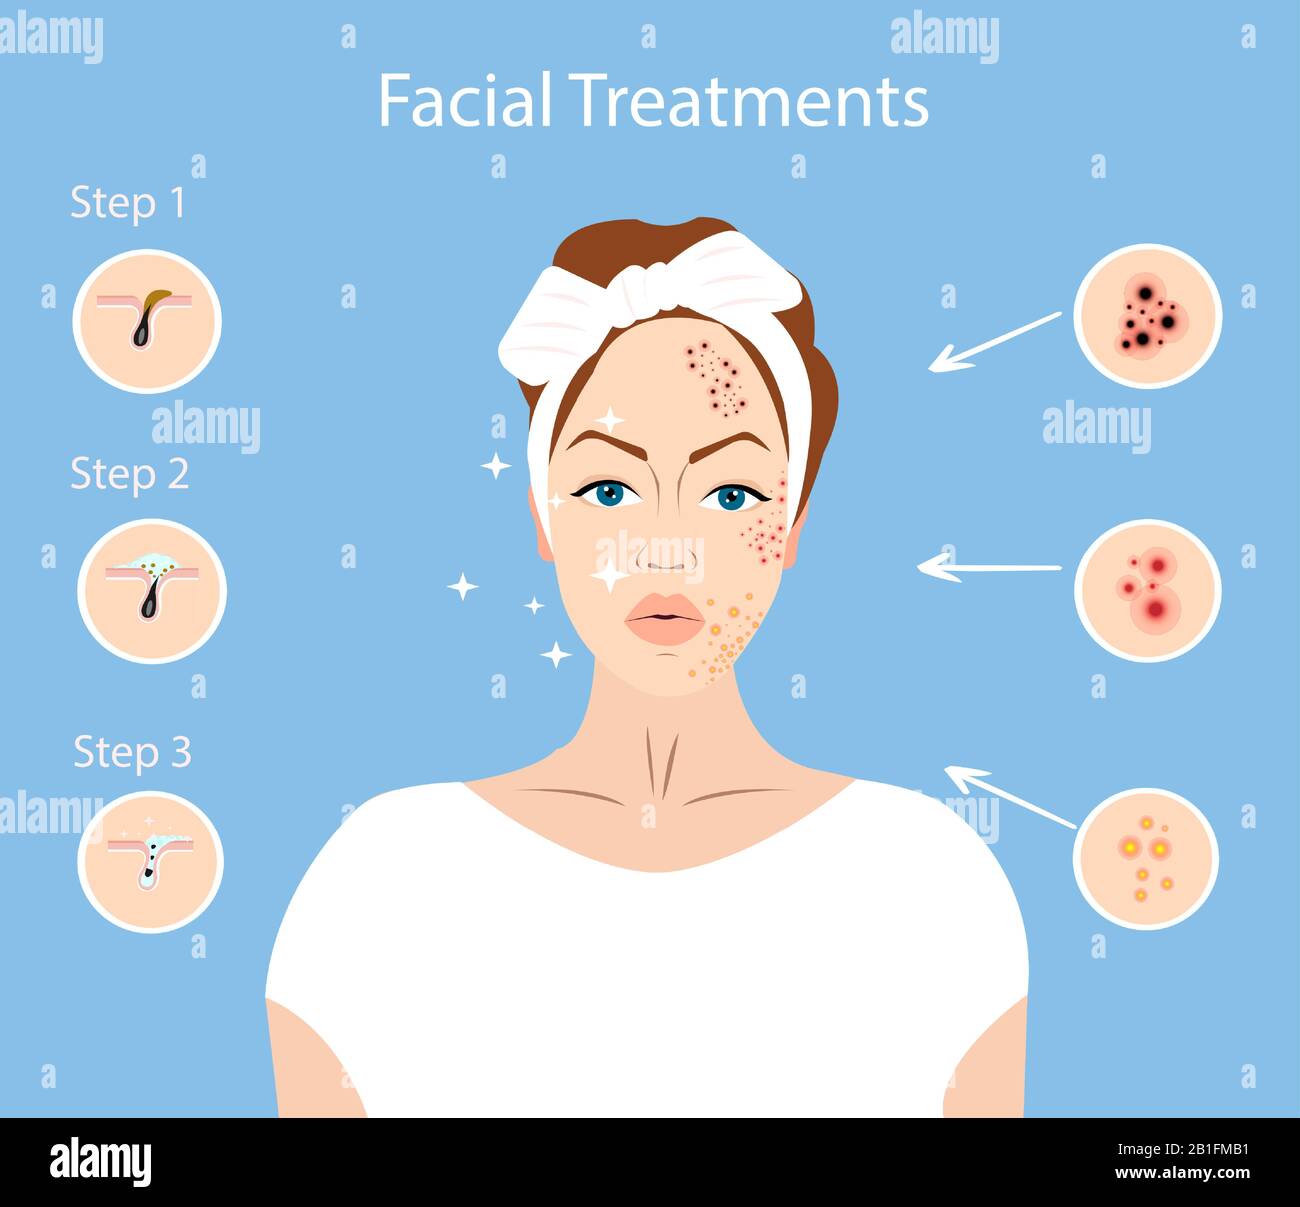 Vector of a young woman with face imperfections. Facial treatments infographic. Stock Vector